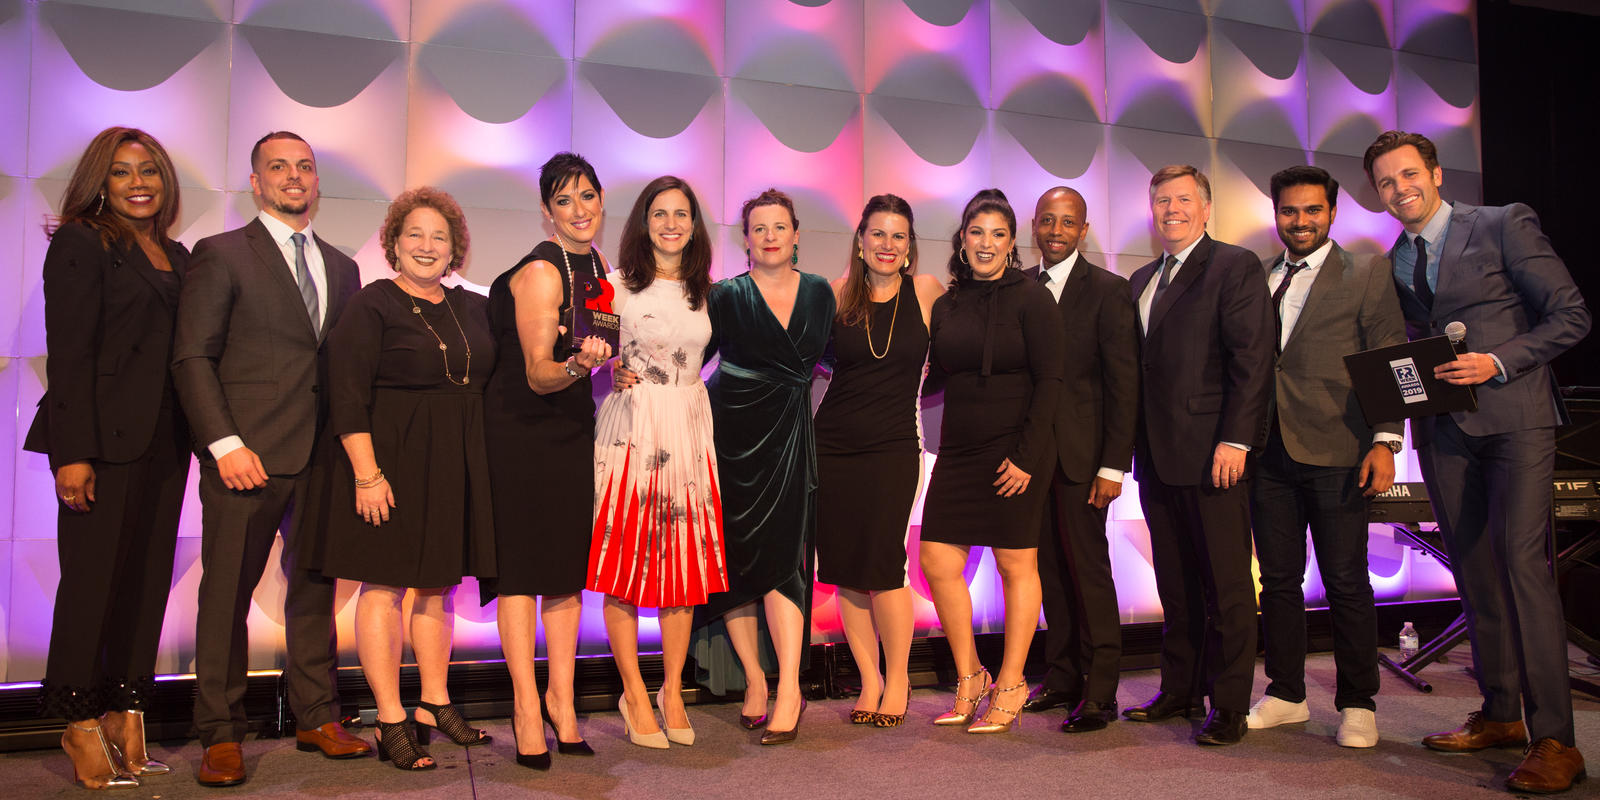 Zeno Group wins Agency of the Year and Midsize Agency of the Year at the PRWeek US Awards 